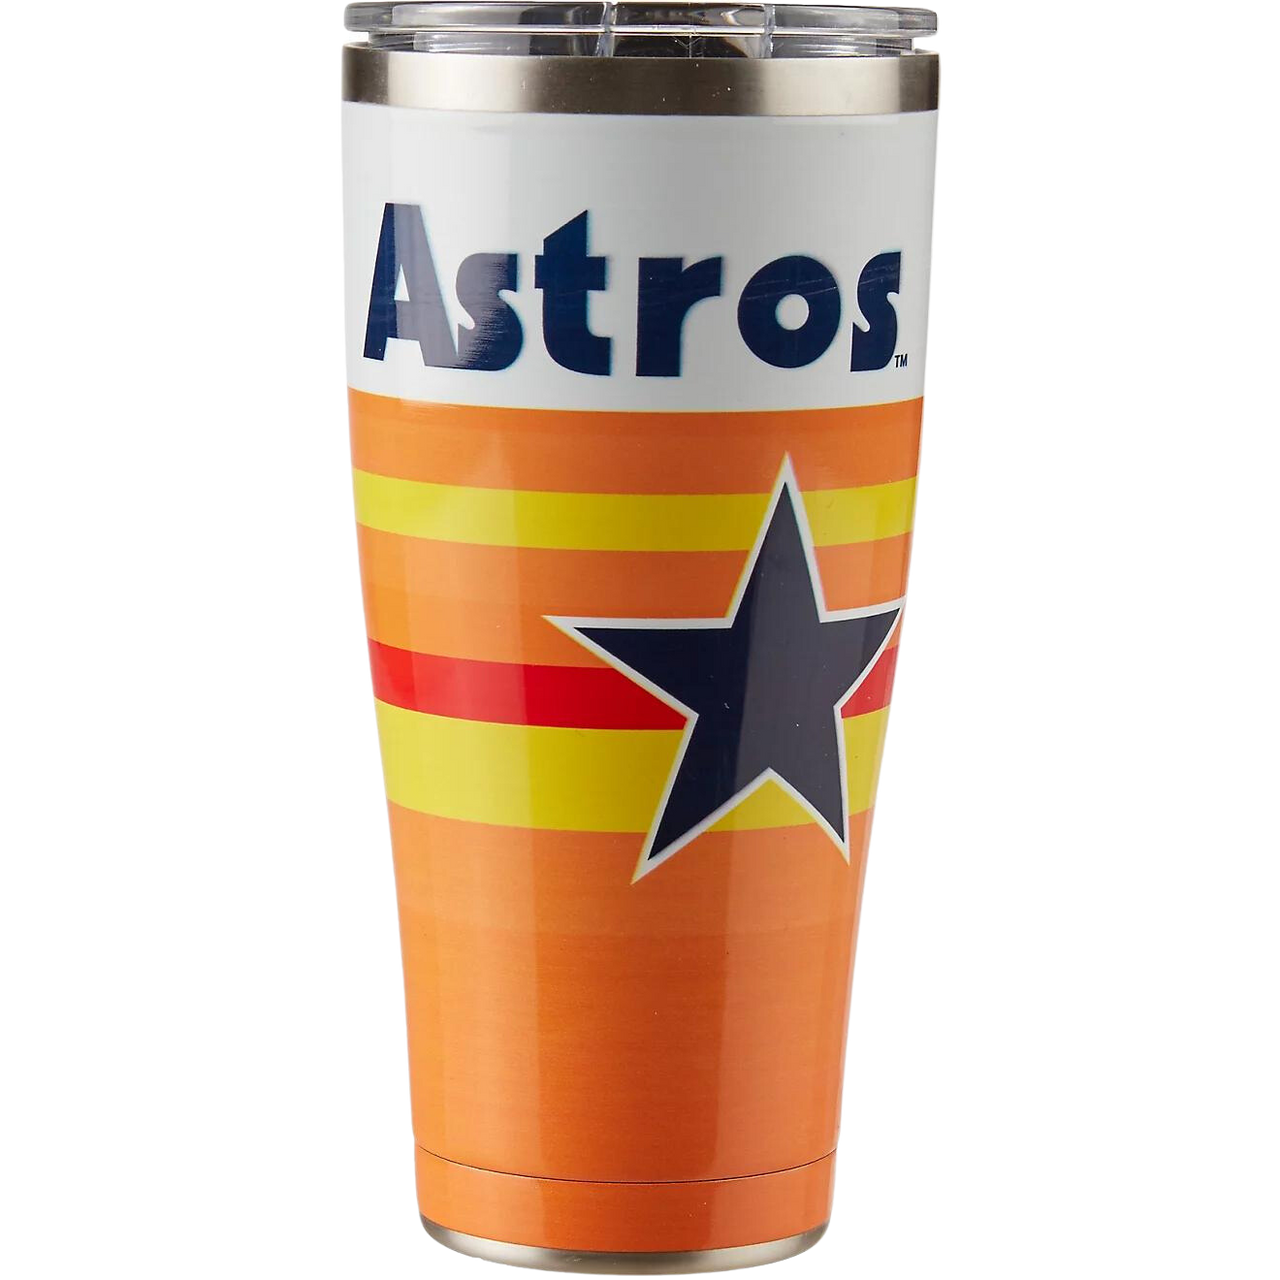 Tervis Houston Astros 16oz. All Over Wrap Tumbler with Lid